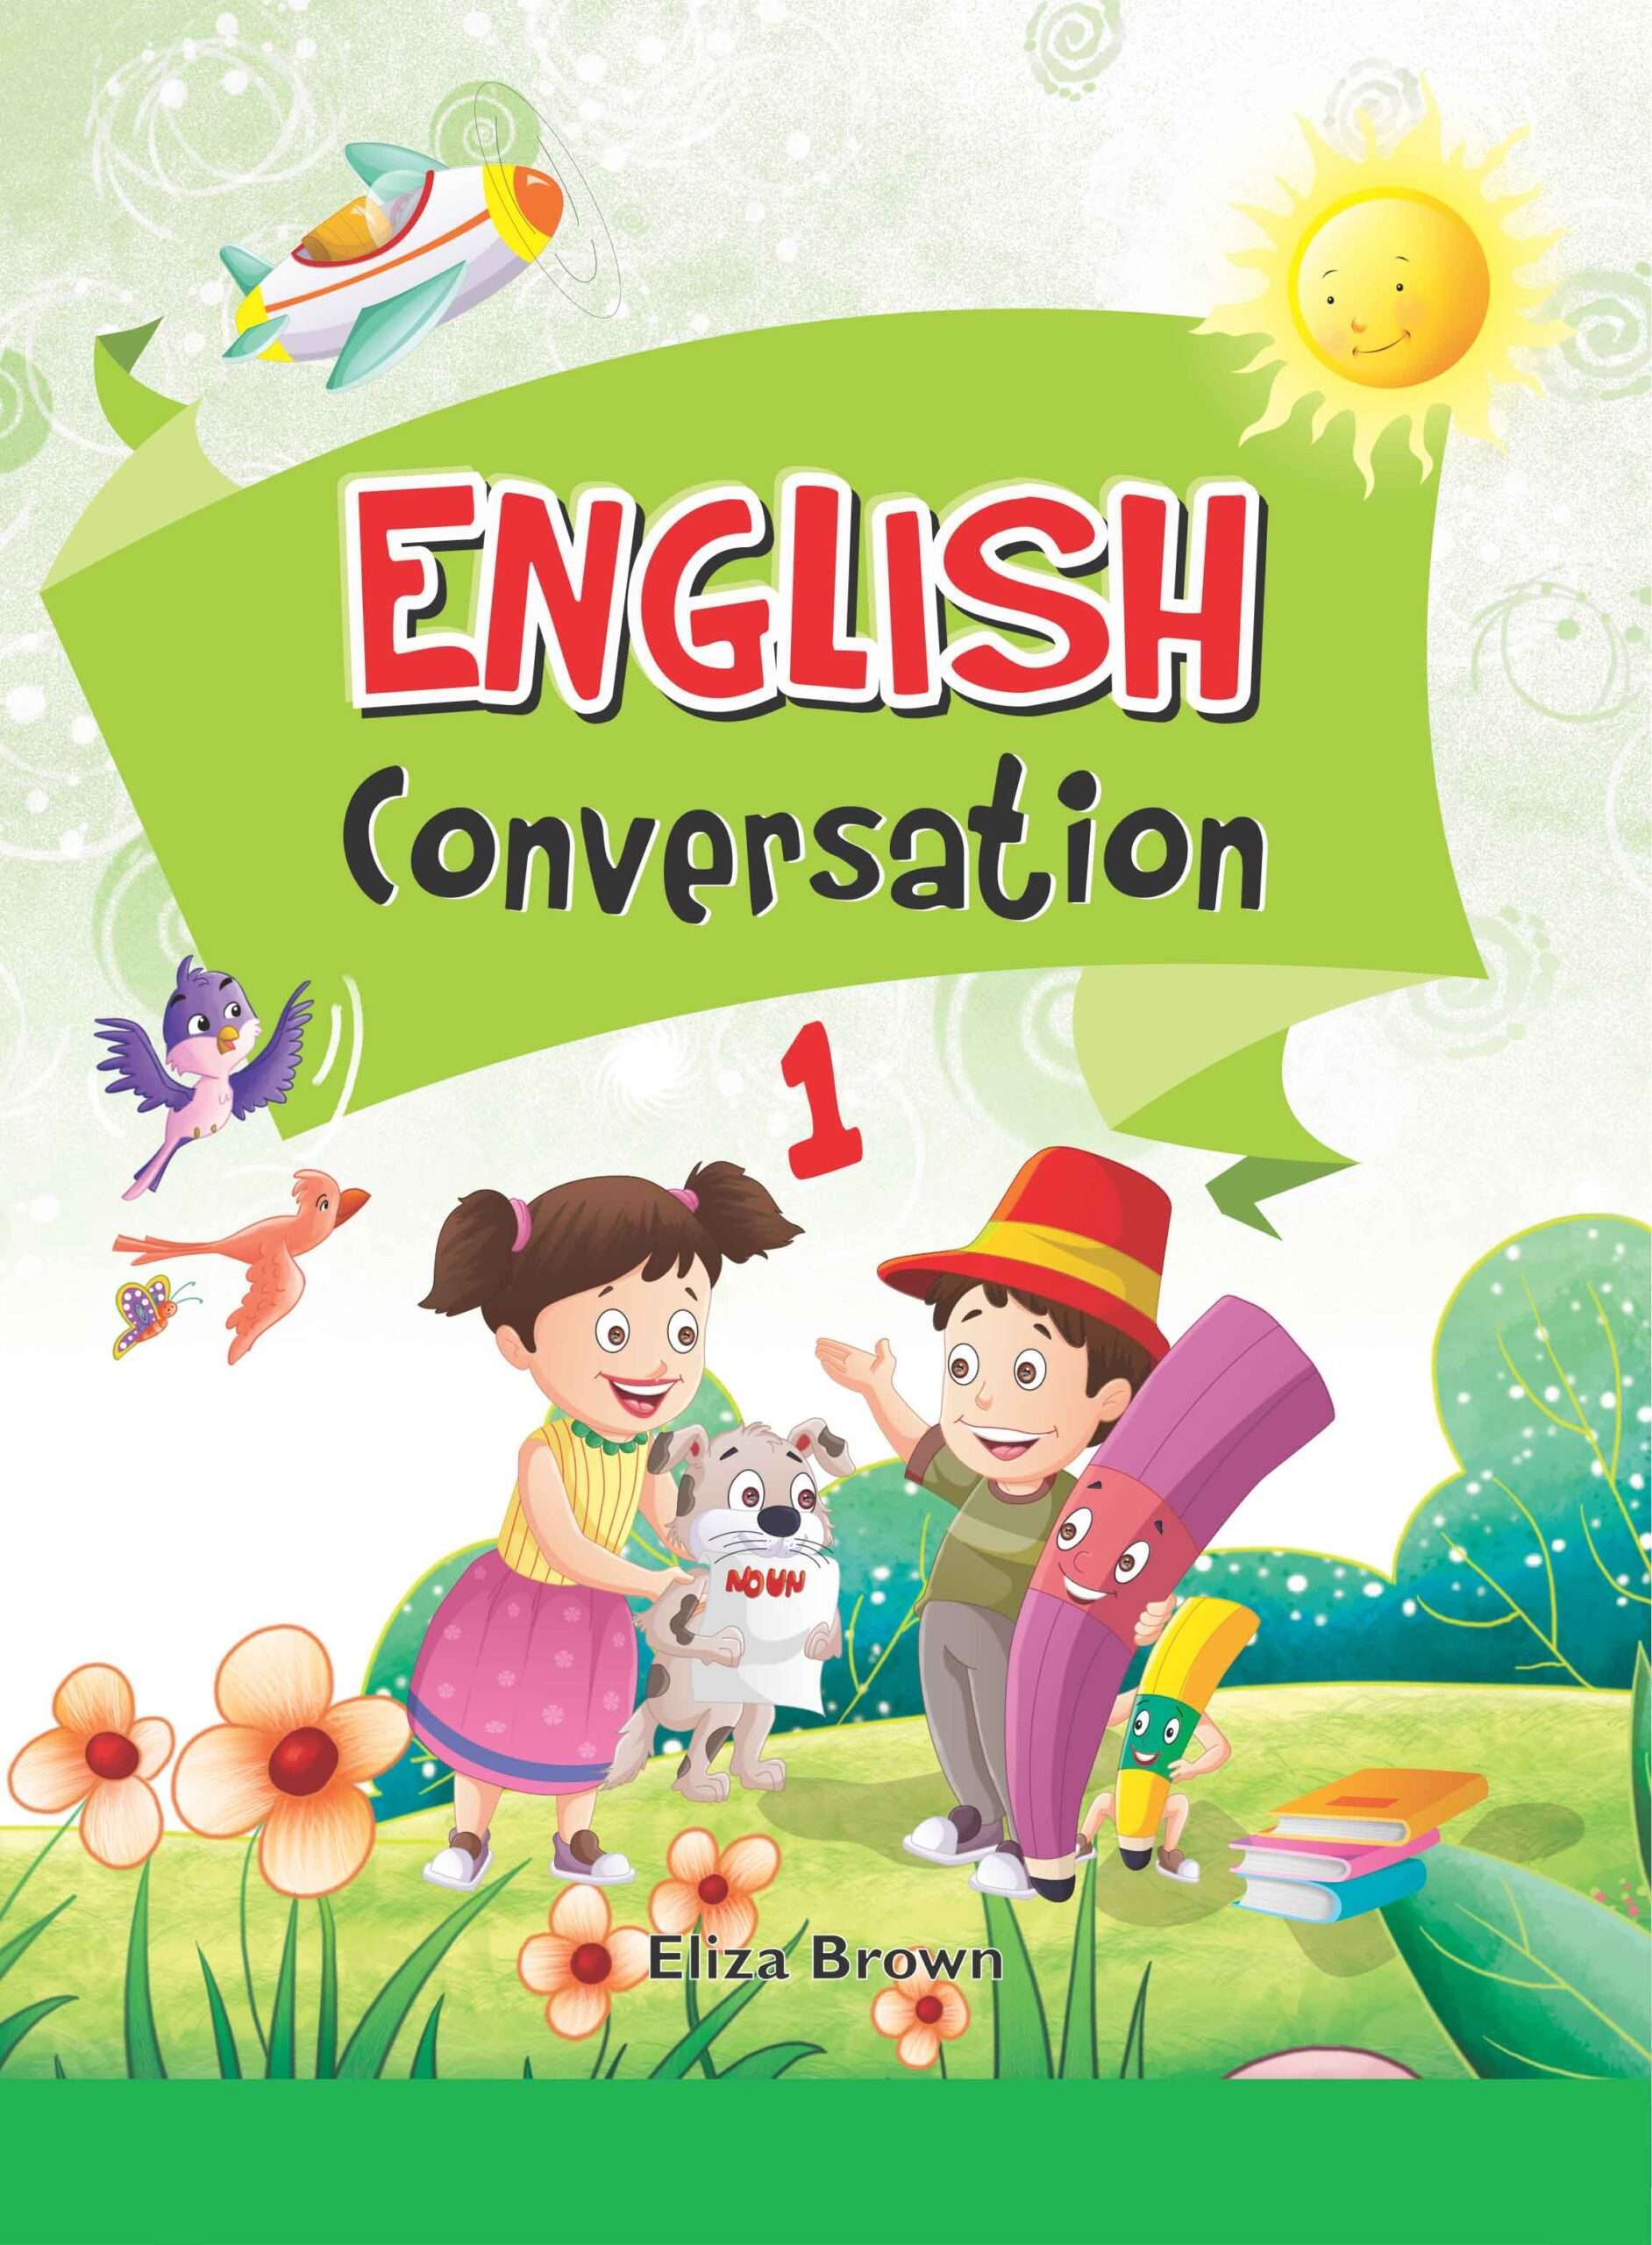 Buy English Conversation for 1